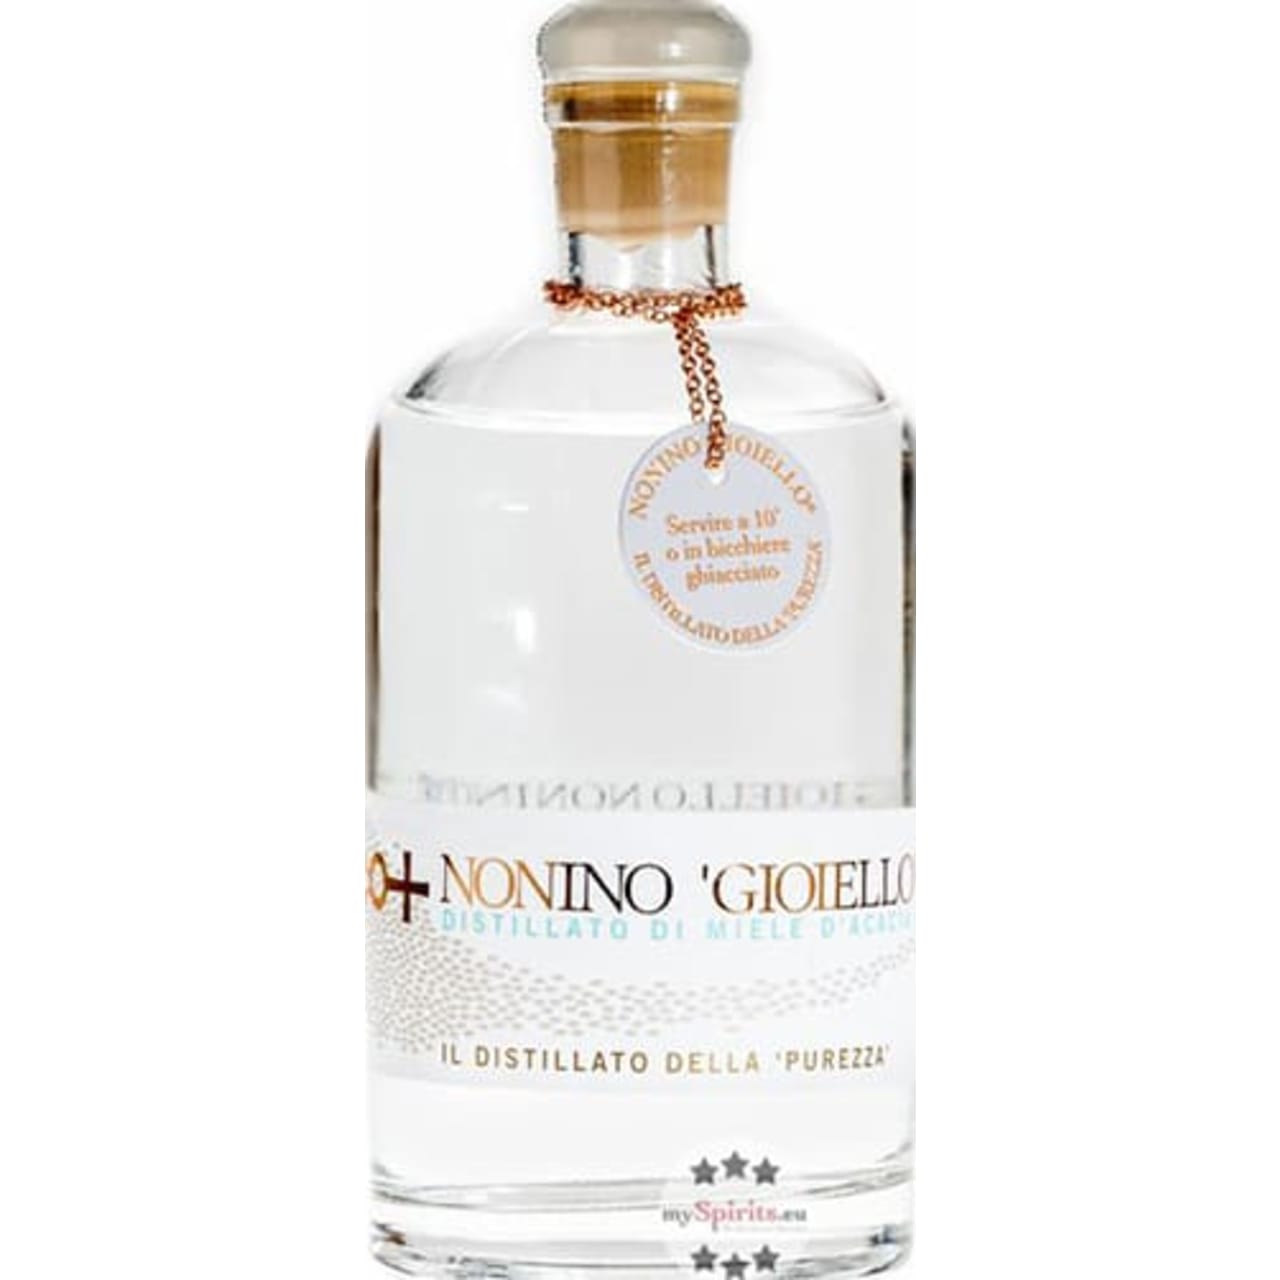 A delicious Eau De vie made from honey in all its taste varieties, this a truly unique expression created by famed Grappa producers Cristina, Antonella and Elisabetta Nonino.